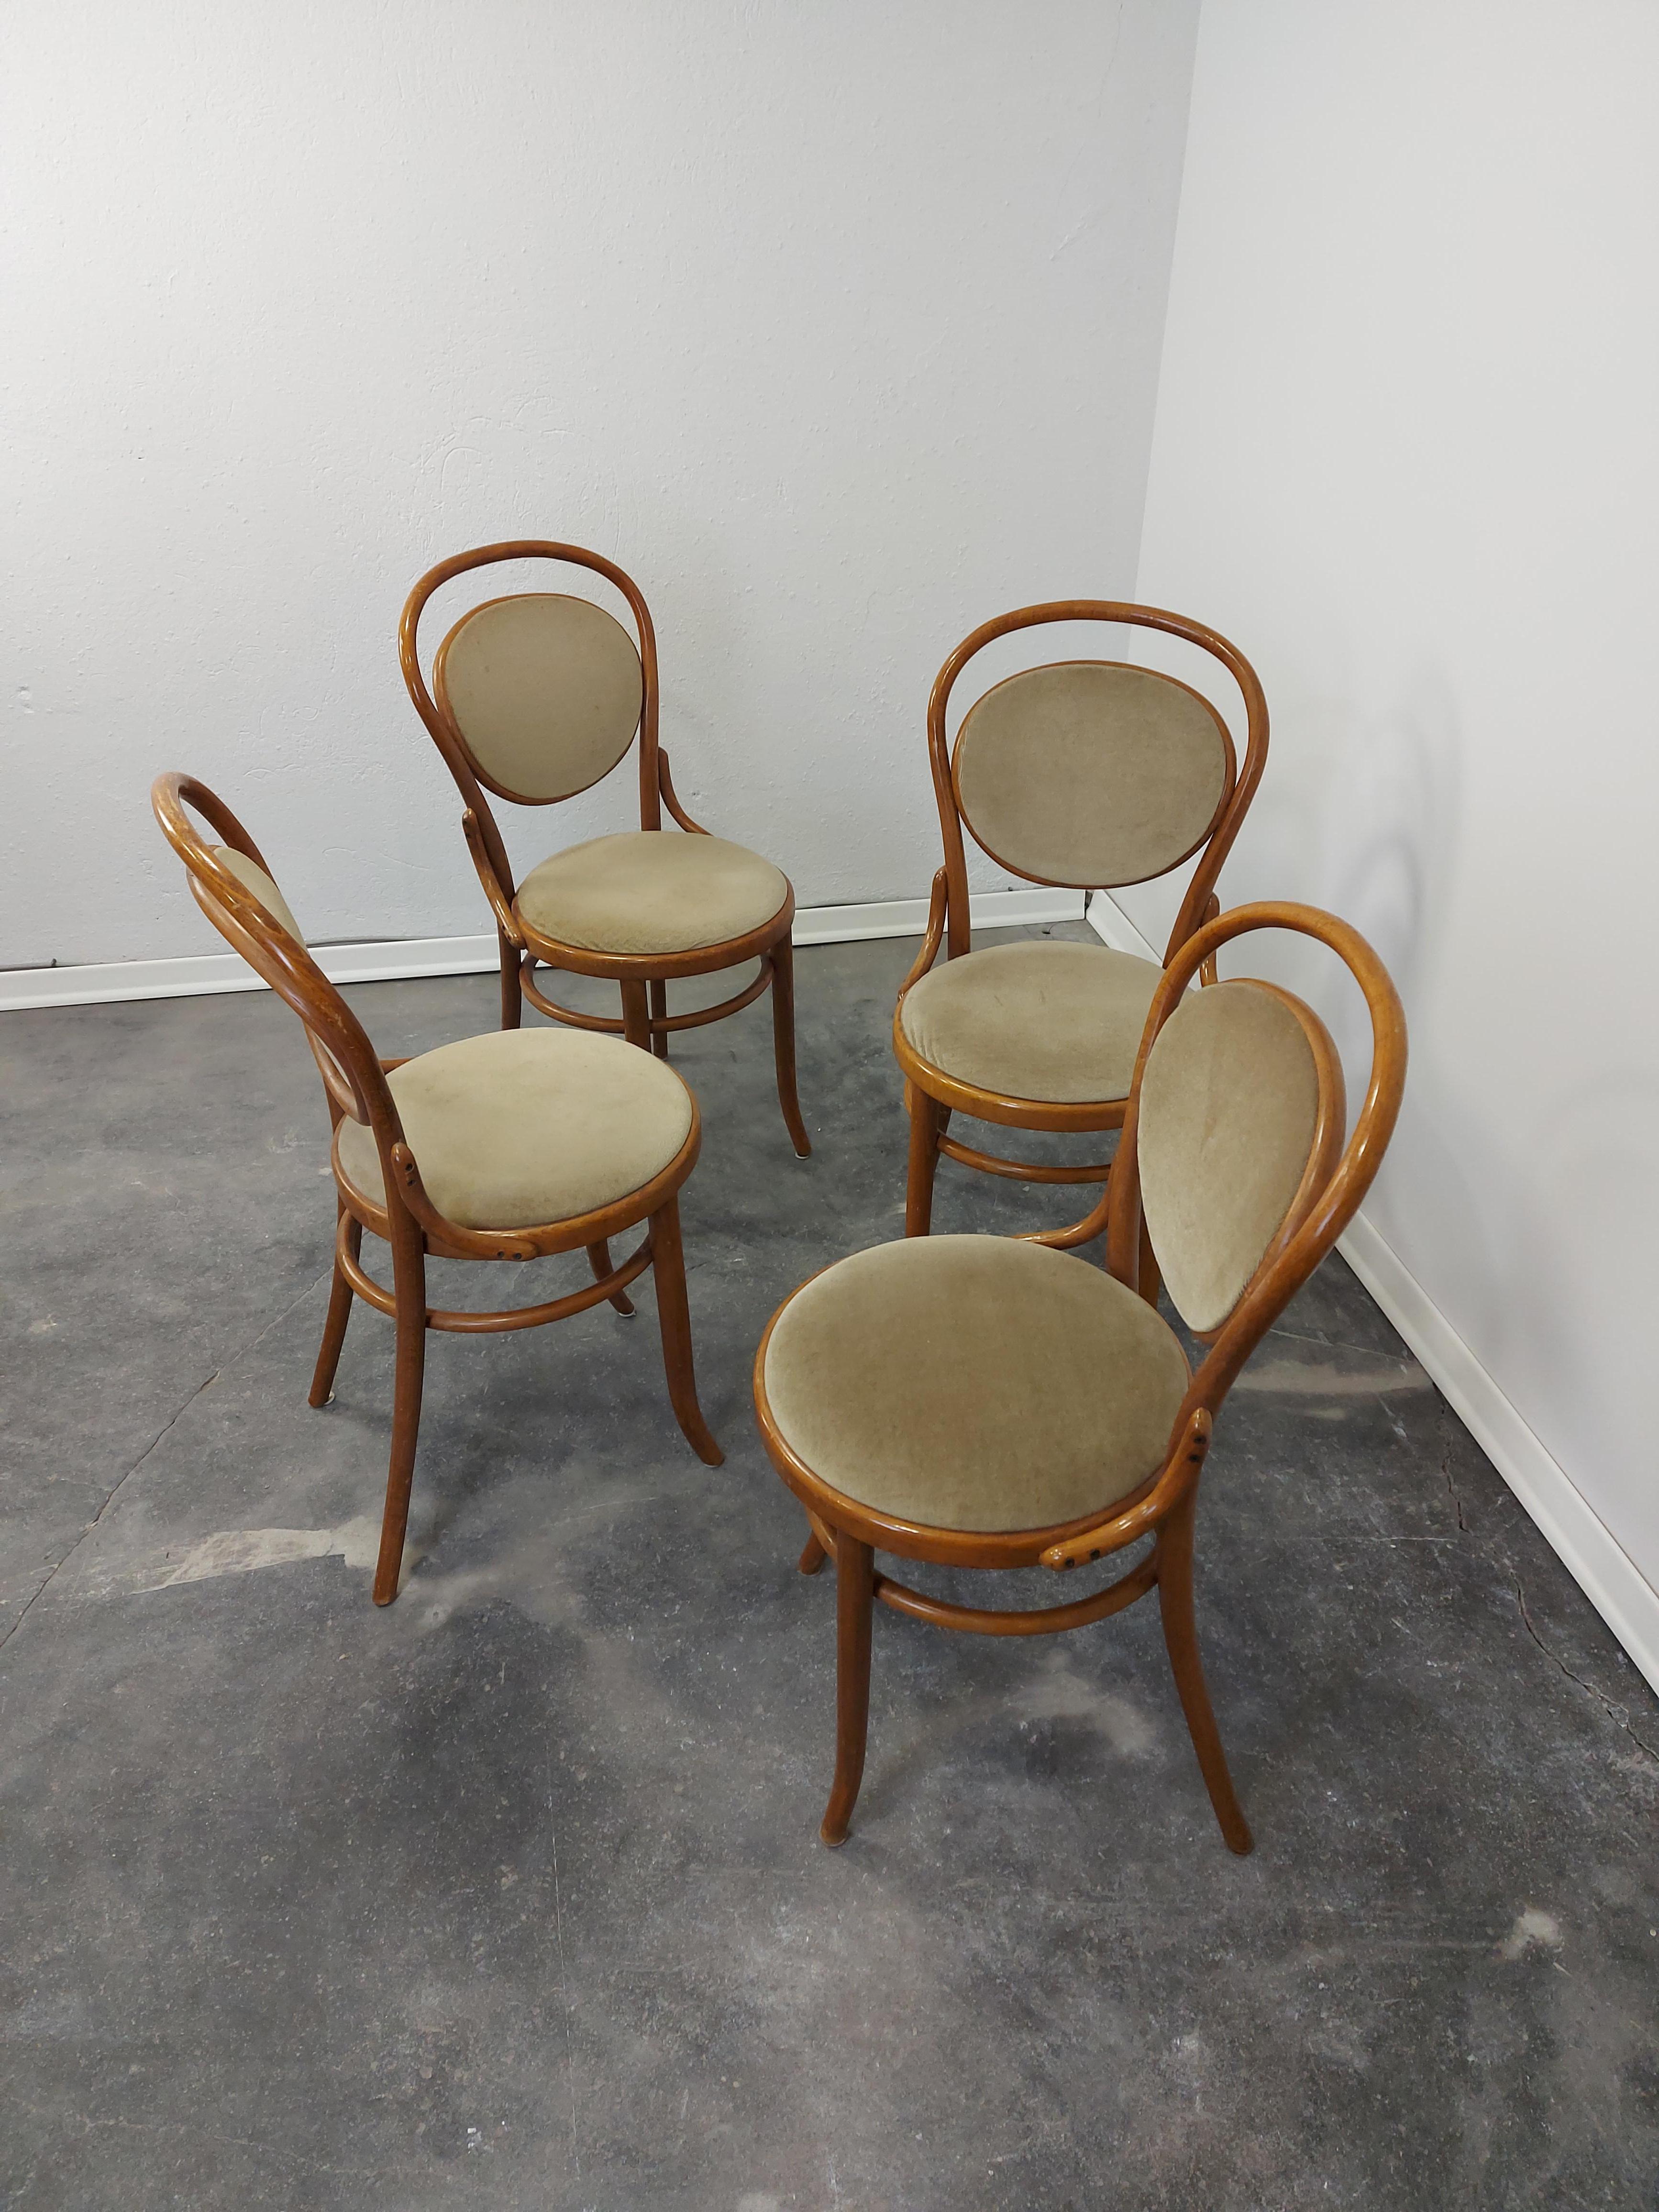 1 of 4 Thonet No. 215 chairs was manufactured 1970.
The chair was designed by Michael Thonet in 1859. 
It features a beech bentwood frame and a fabric seat. 
Clear wood finish. Wood and fabric are in good condition. 
Price is for one chair.